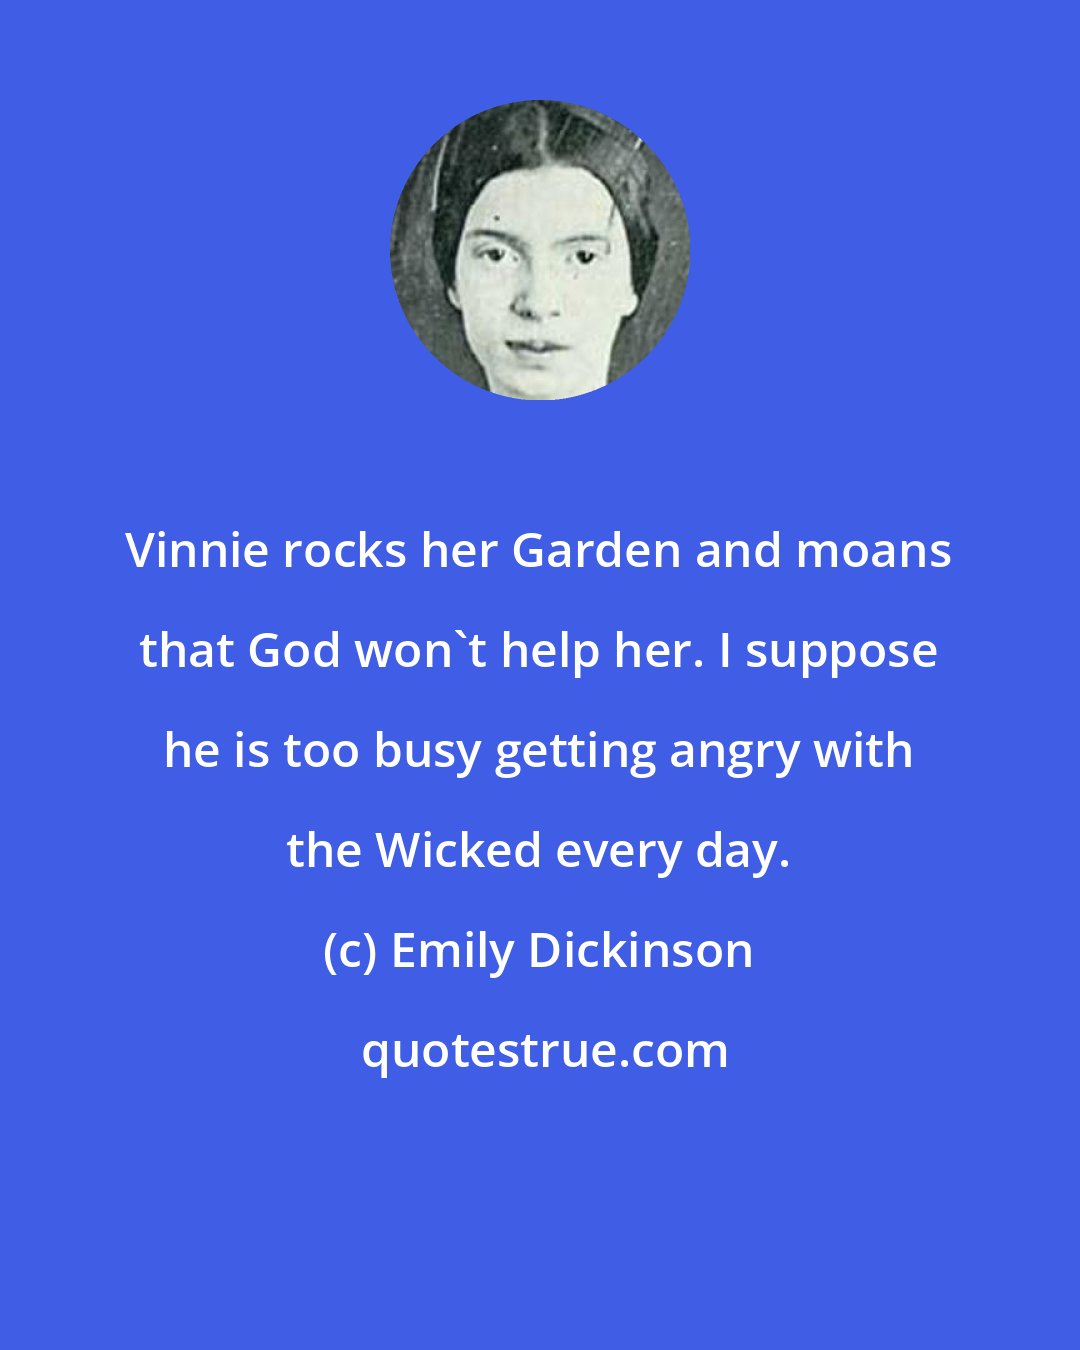 Emily Dickinson: Vinnie rocks her Garden and moans that God won't help her. I suppose he is too busy getting angry with the Wicked every day.